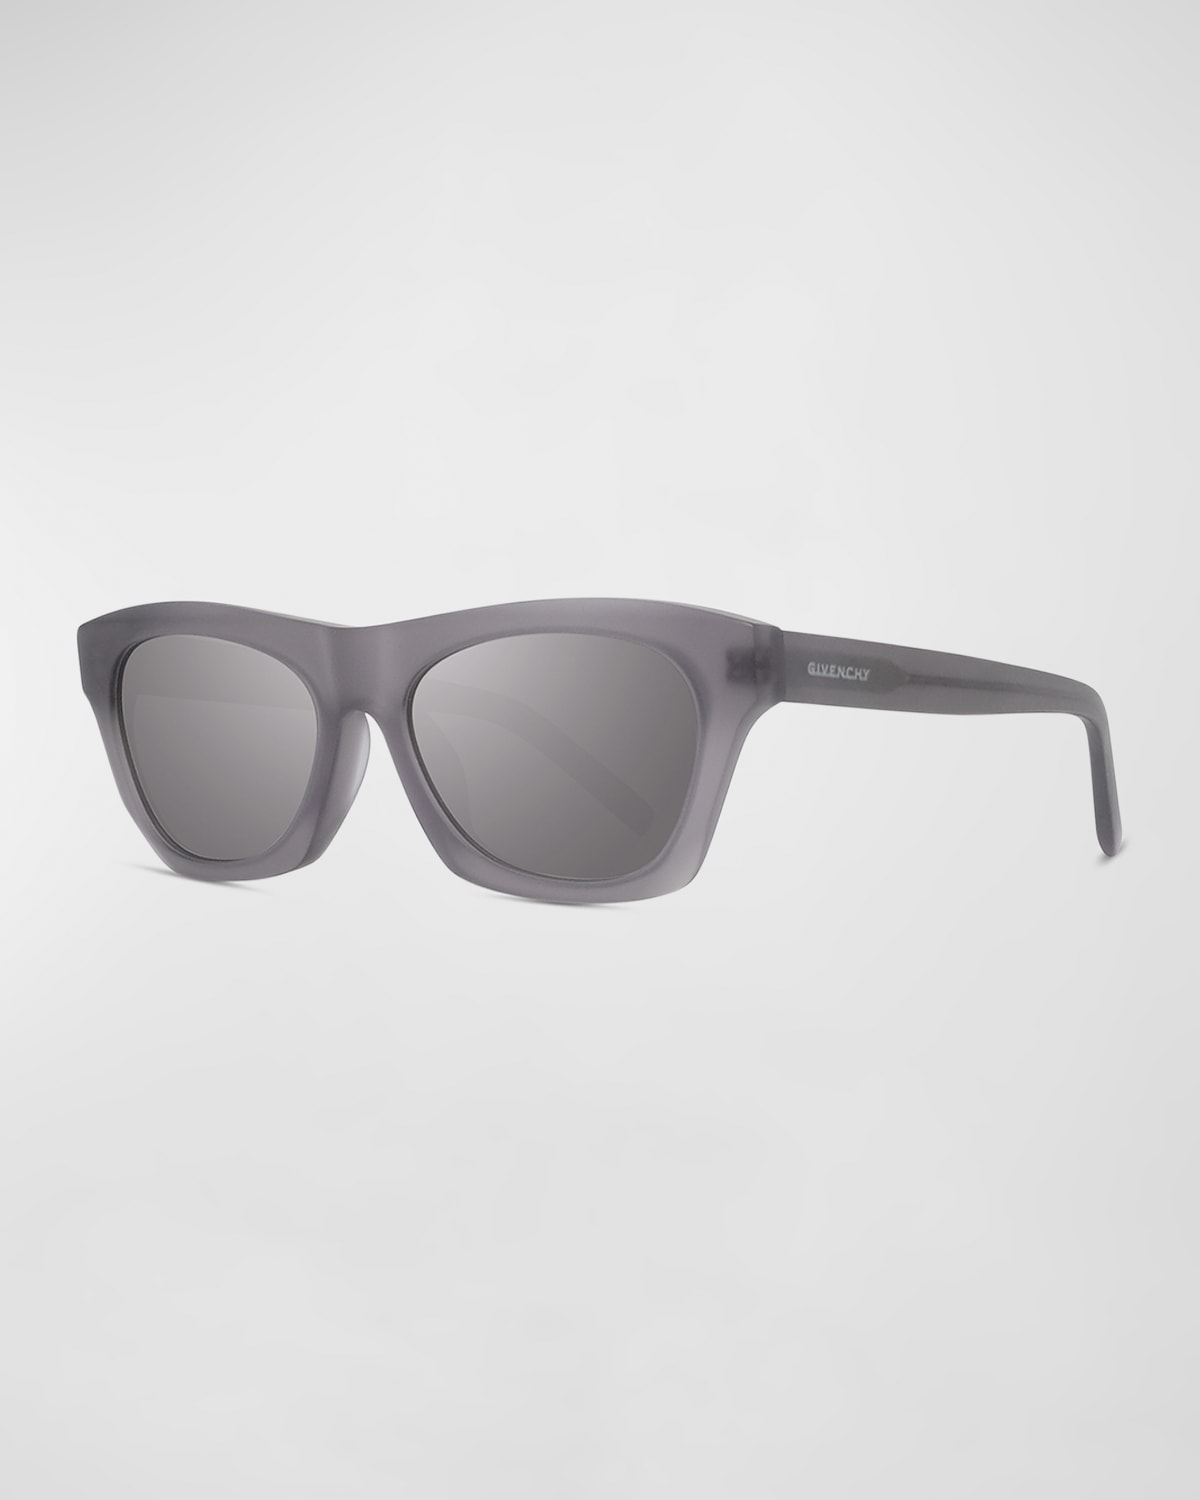 GIVENCHY MEN'S TEMPLE-LOGO OVAL SUNGLASSES